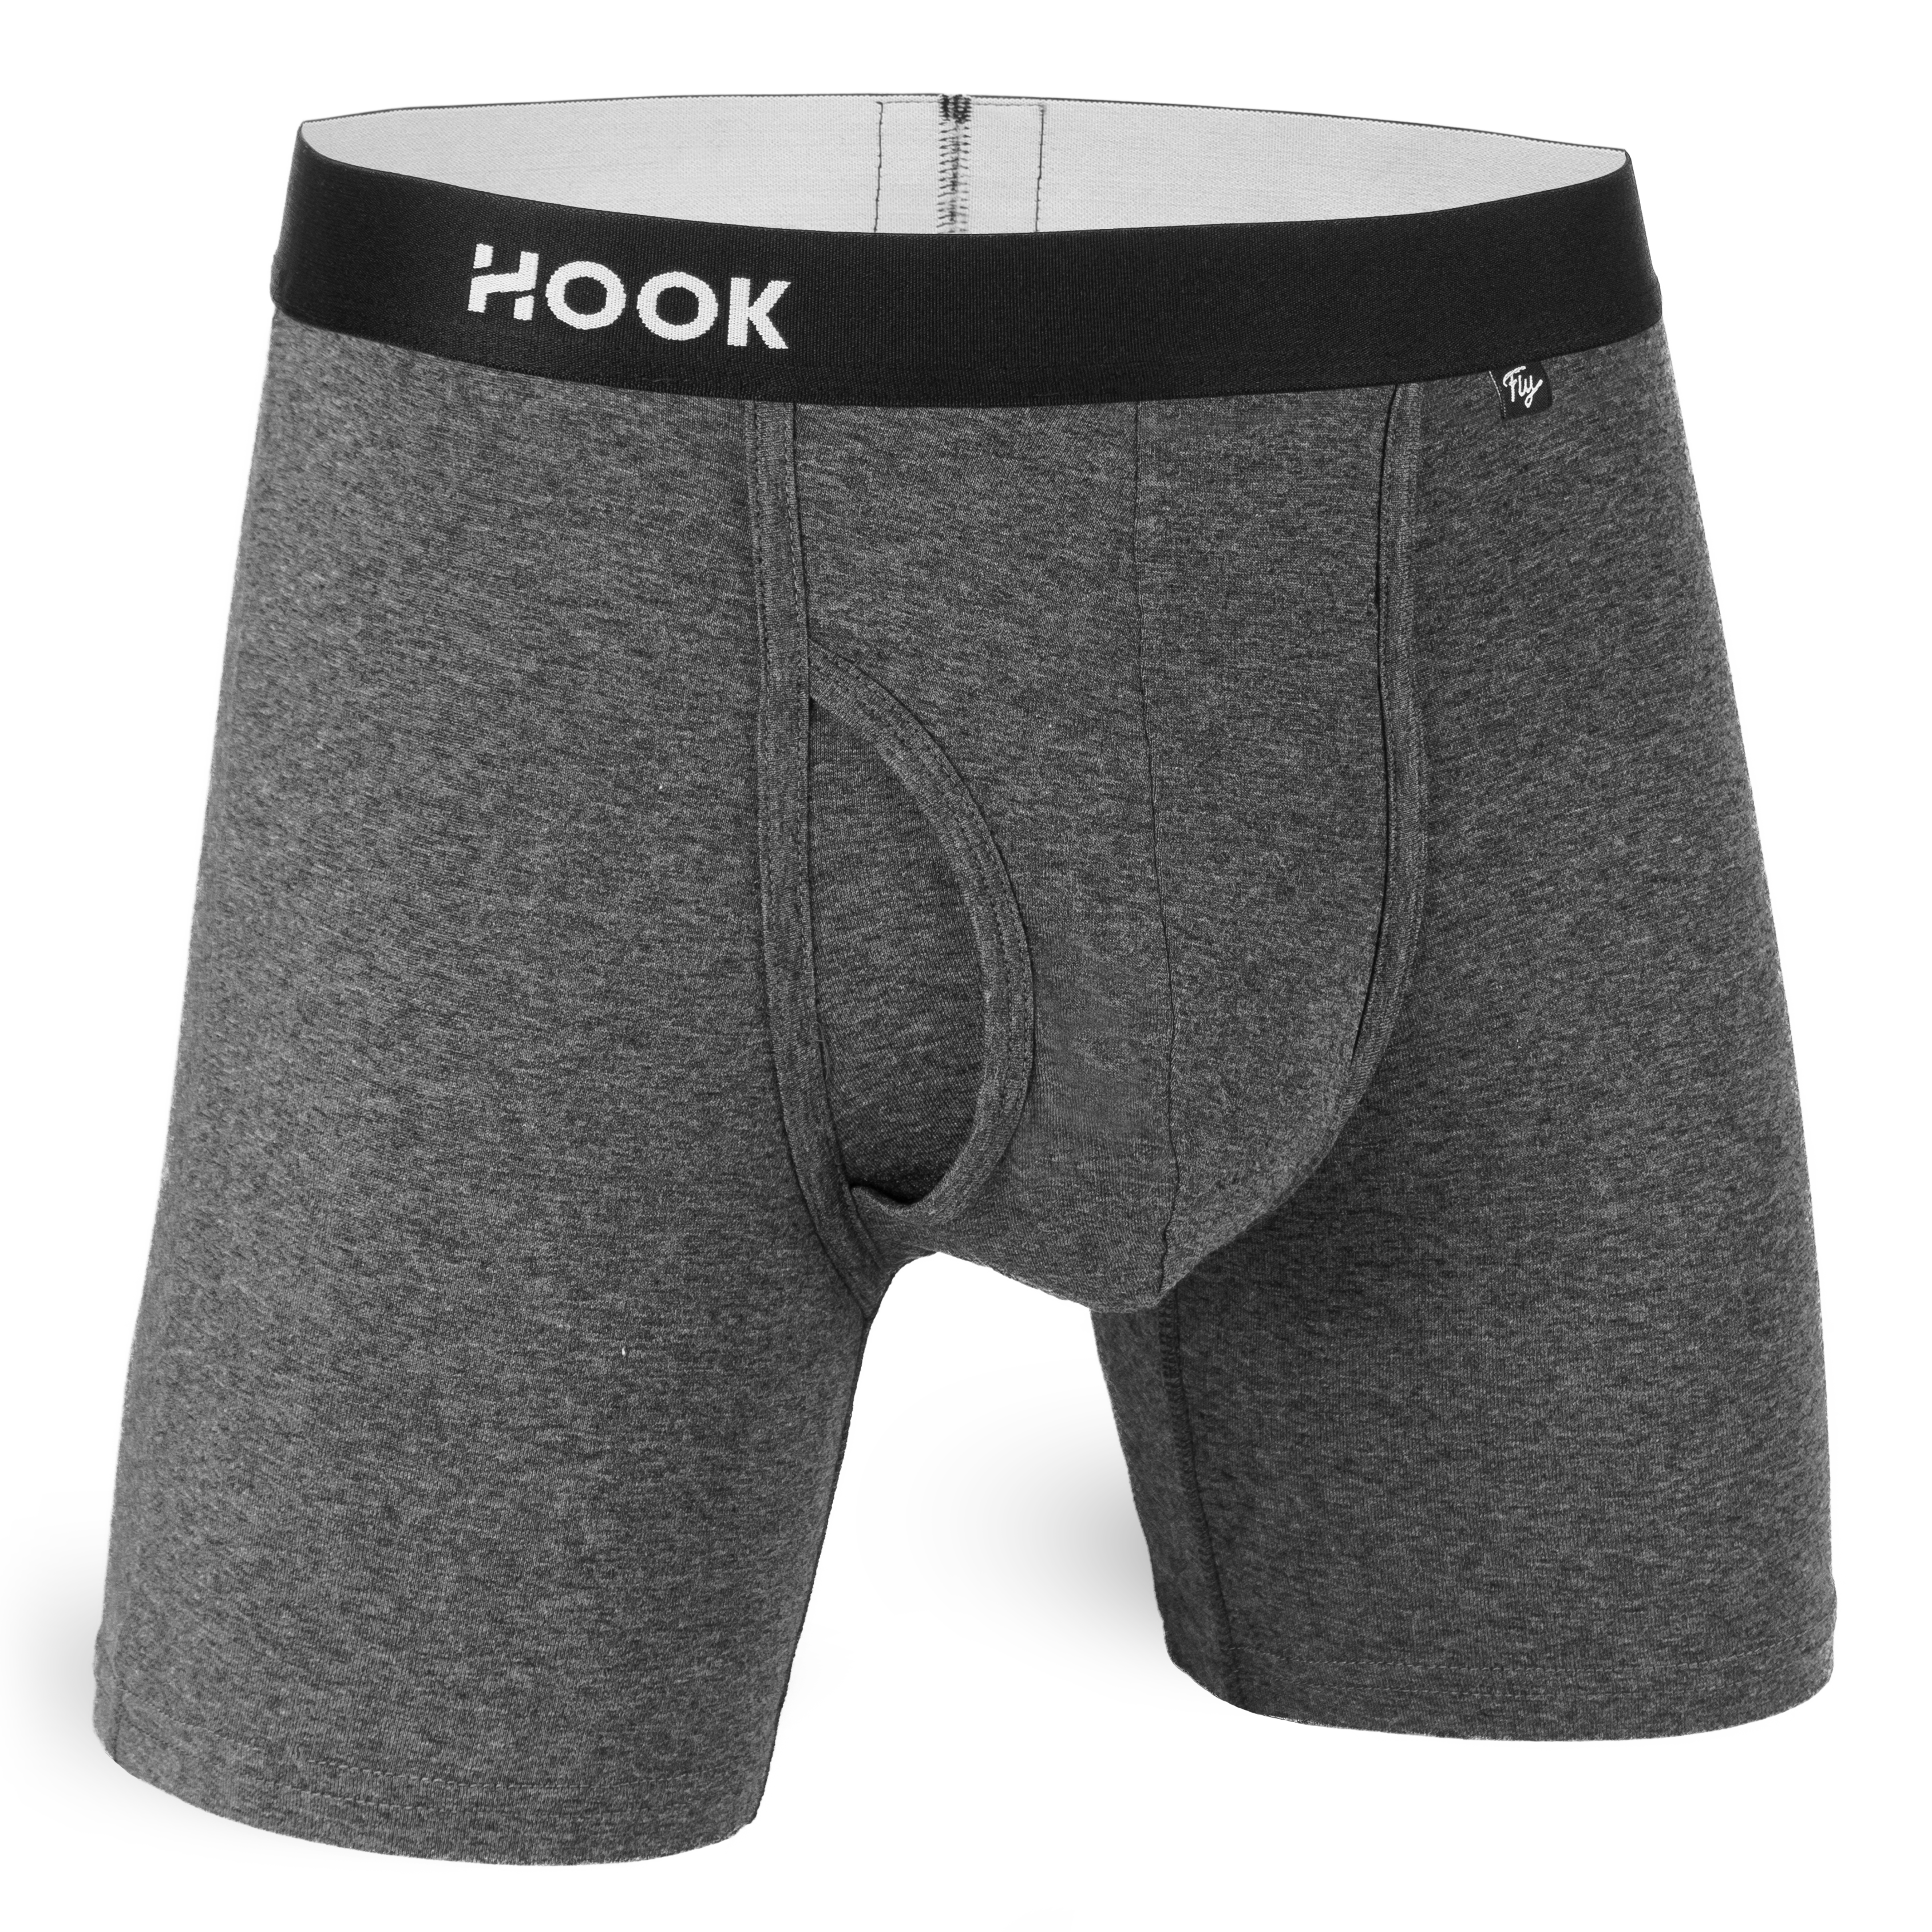 Fly Boxer Brief : Charcoal  Hook Underwear – Mesbobettes